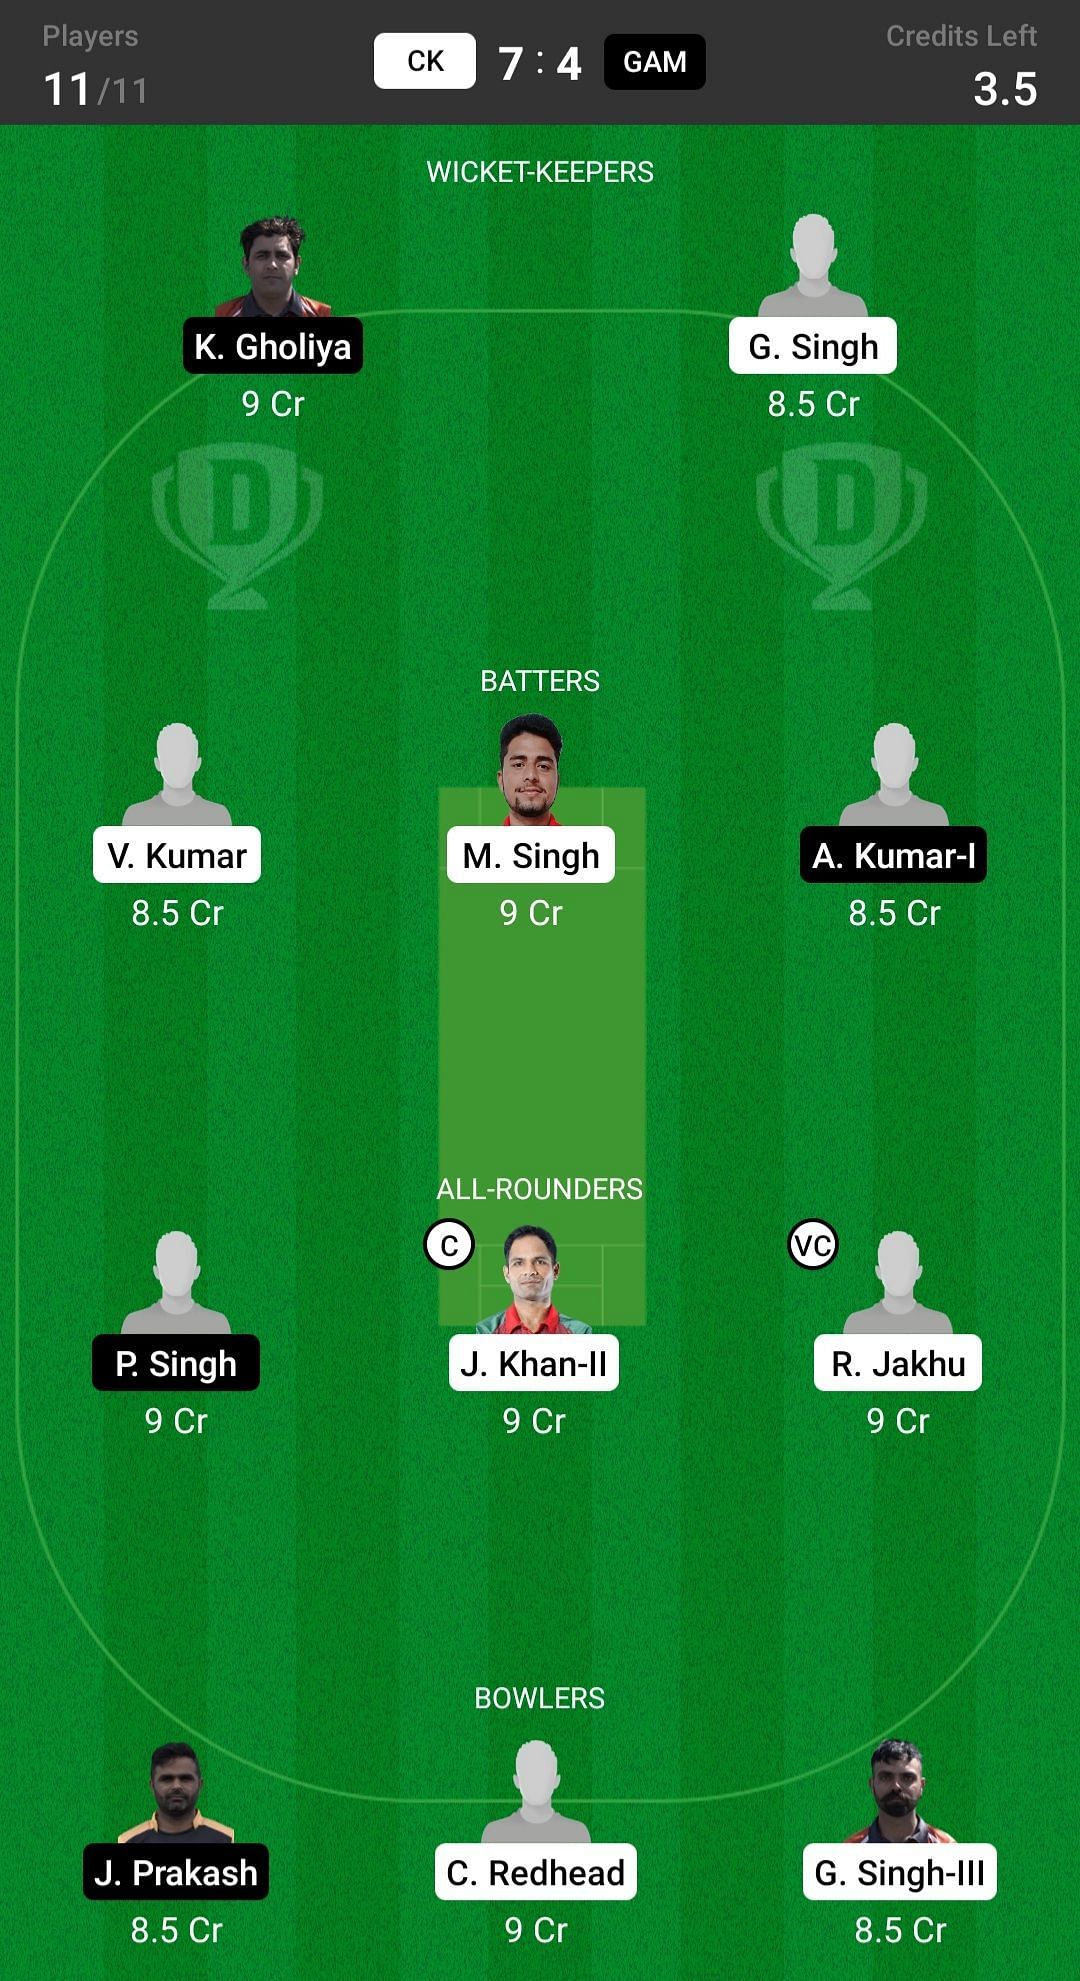 Ck Vs Gam Dream11 Prediction Fantasy Cricket Tips Today S Playing 11s And Pitch Report For Portugal T 22 Match 11 12